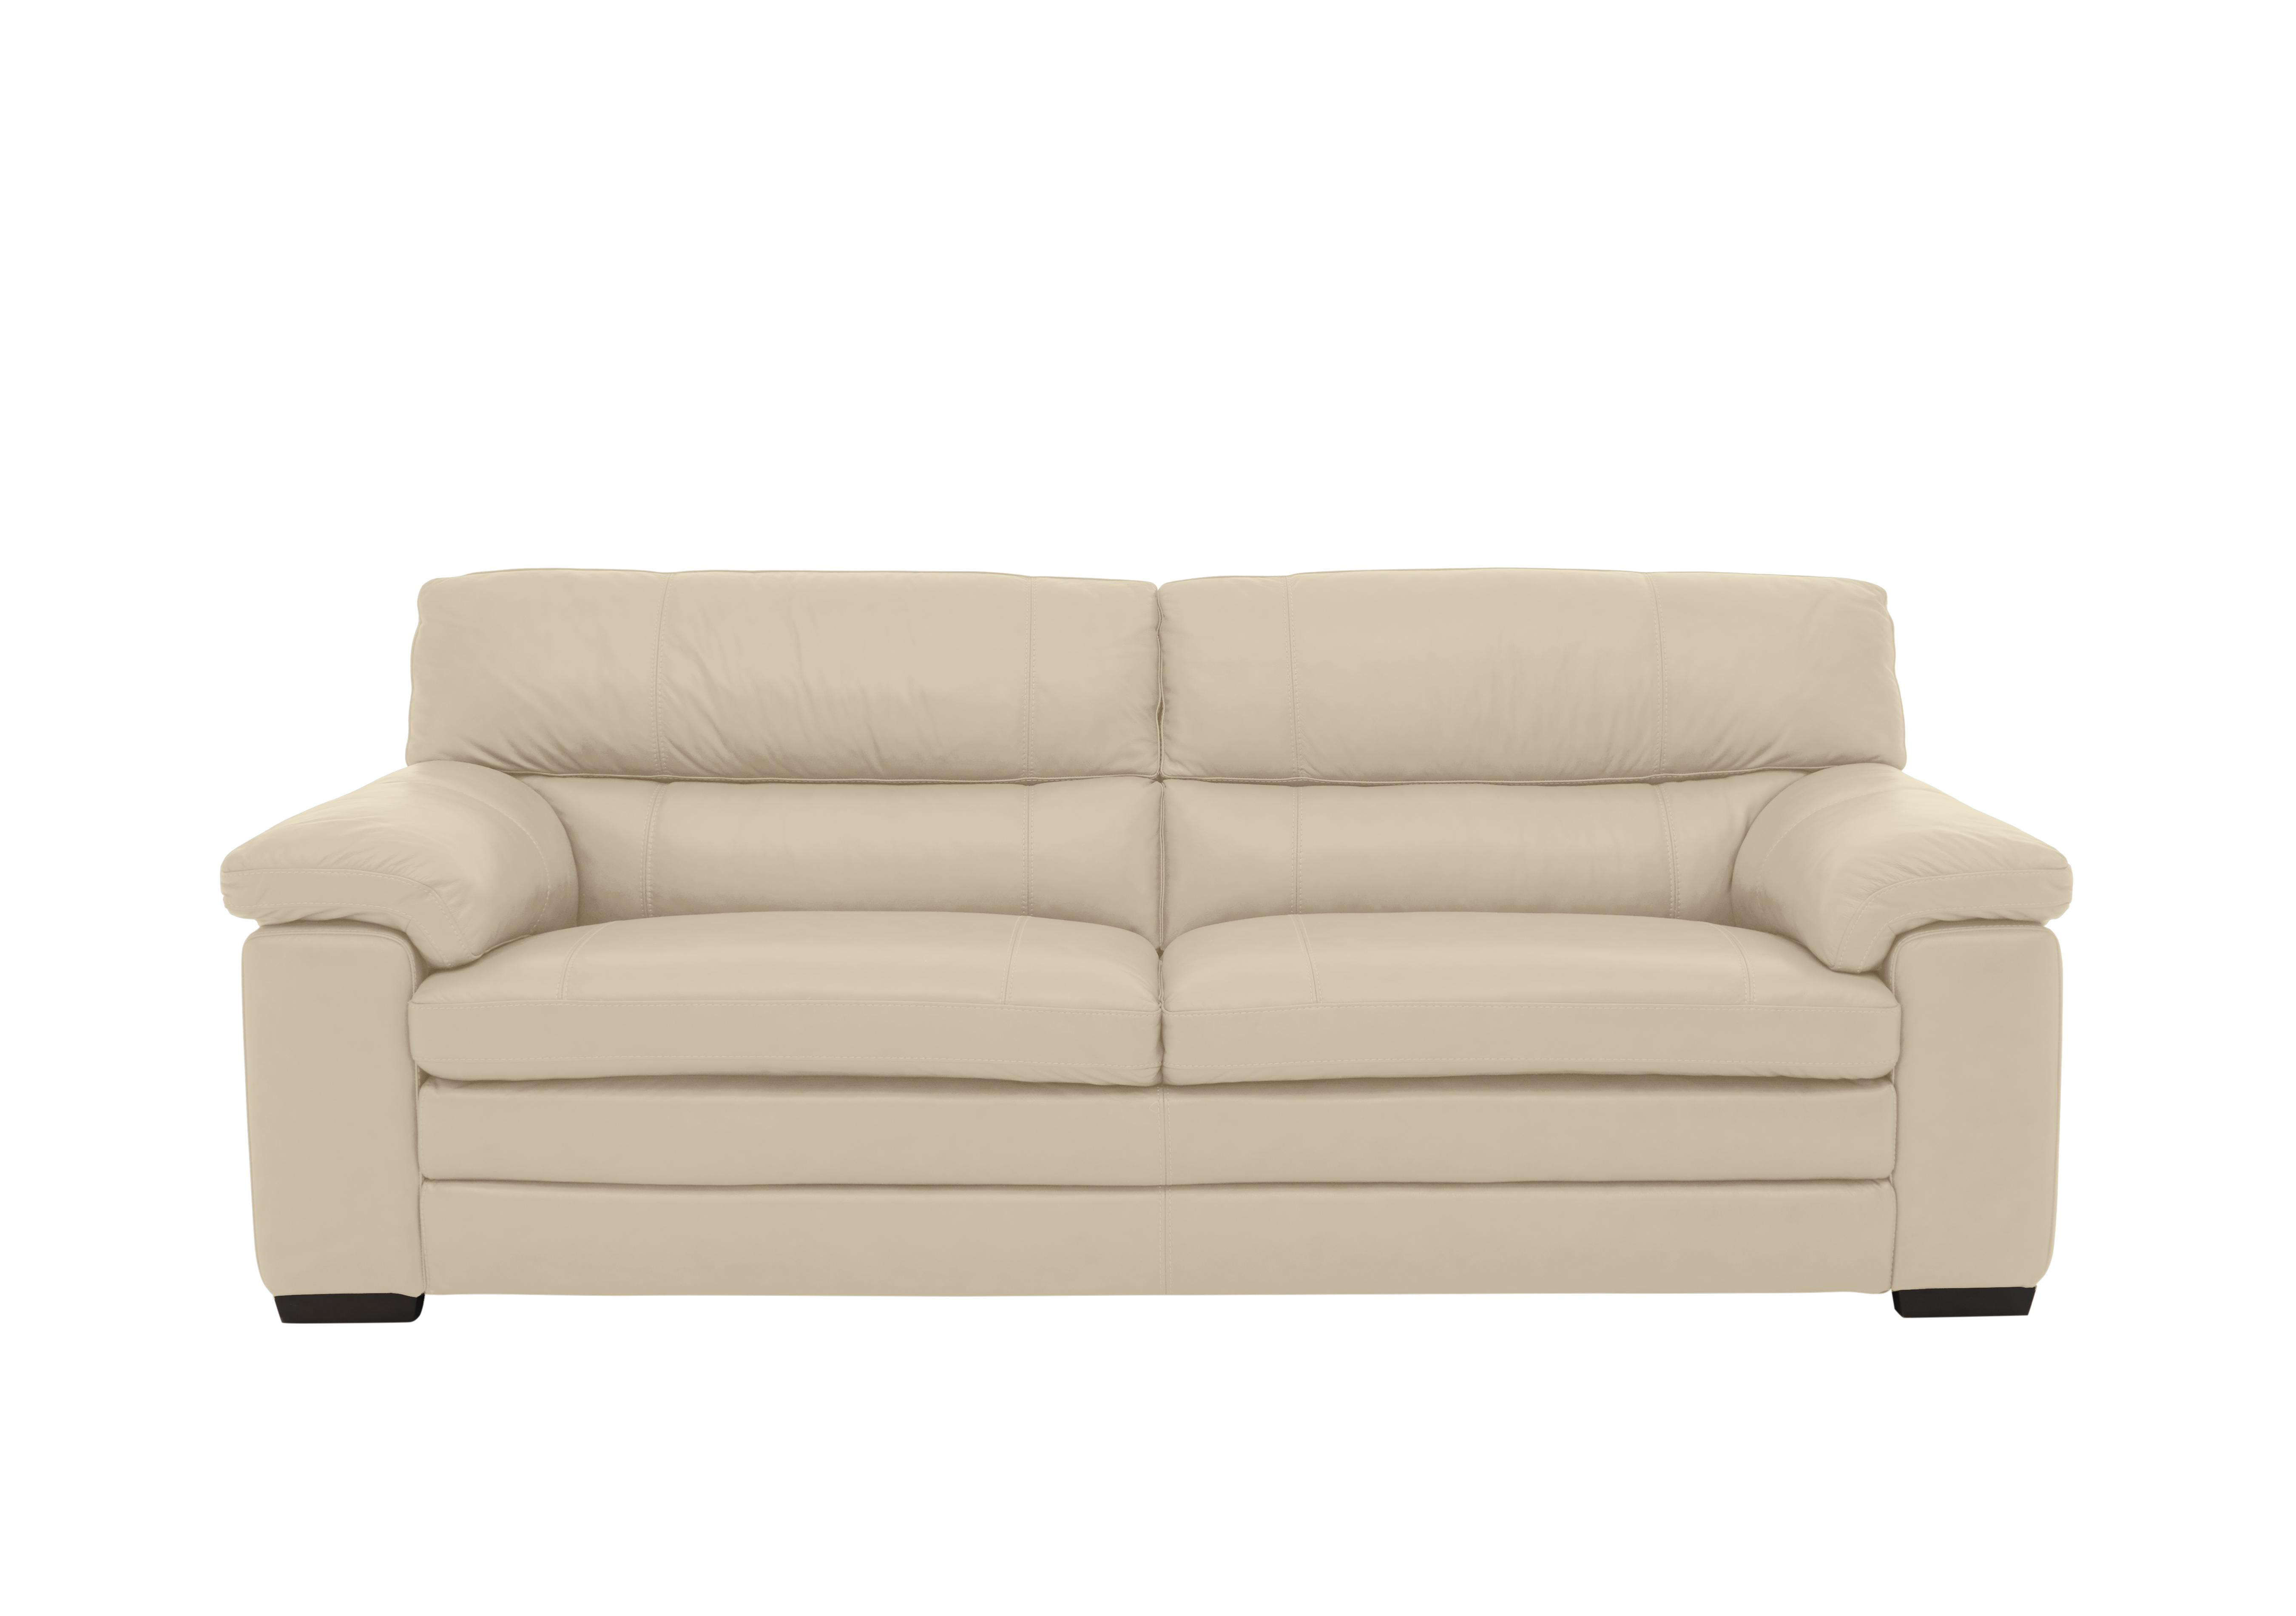 Cozee 3 Seater Pure Premium Leather Sofa in Bv-862c Bisque on Furniture Village